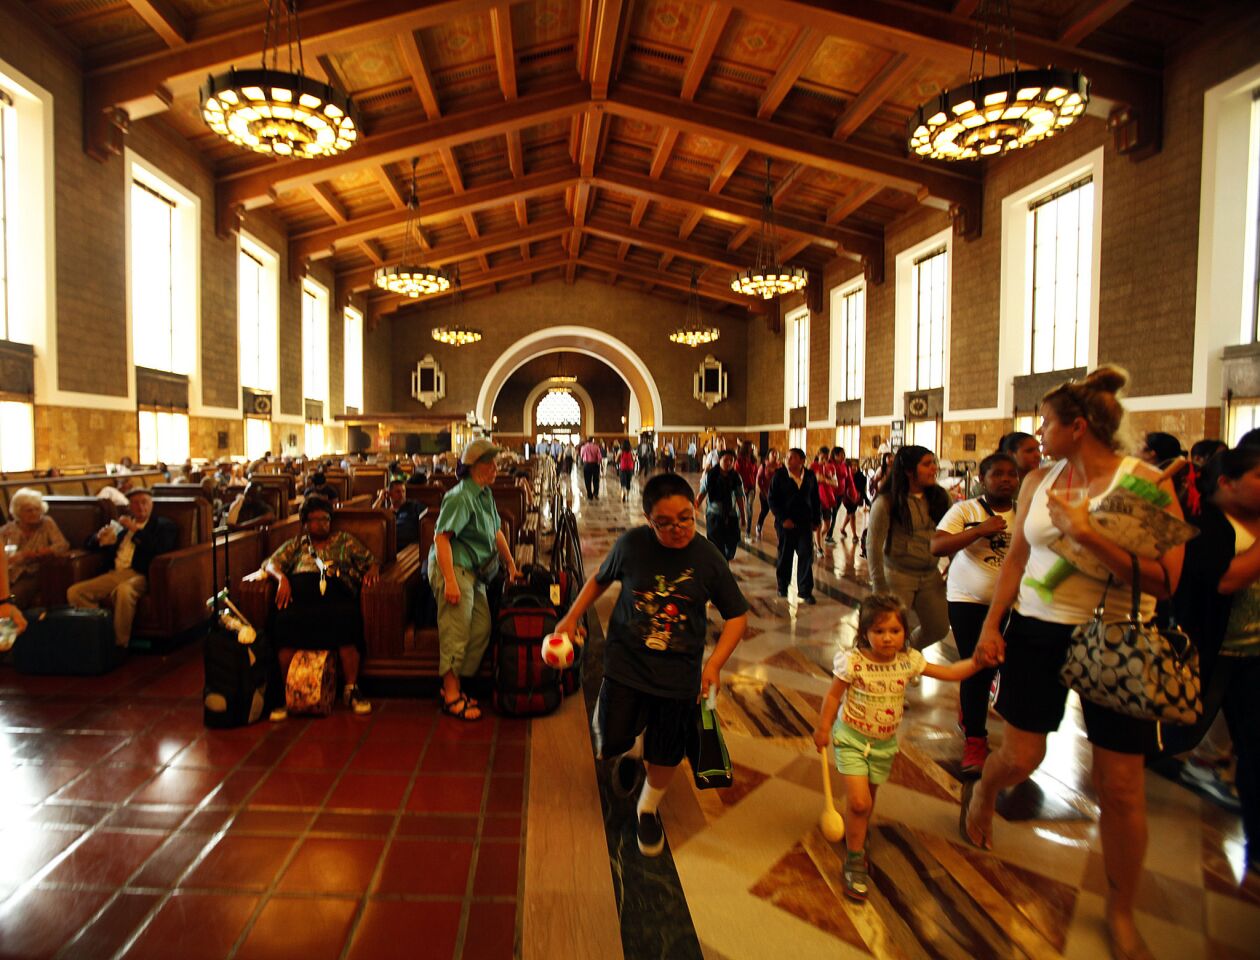 The interior of the historic Los Angeles Union Station. The largest railroad passenger terminal in the Western United States celebrated its 75th anniversary on May 3.